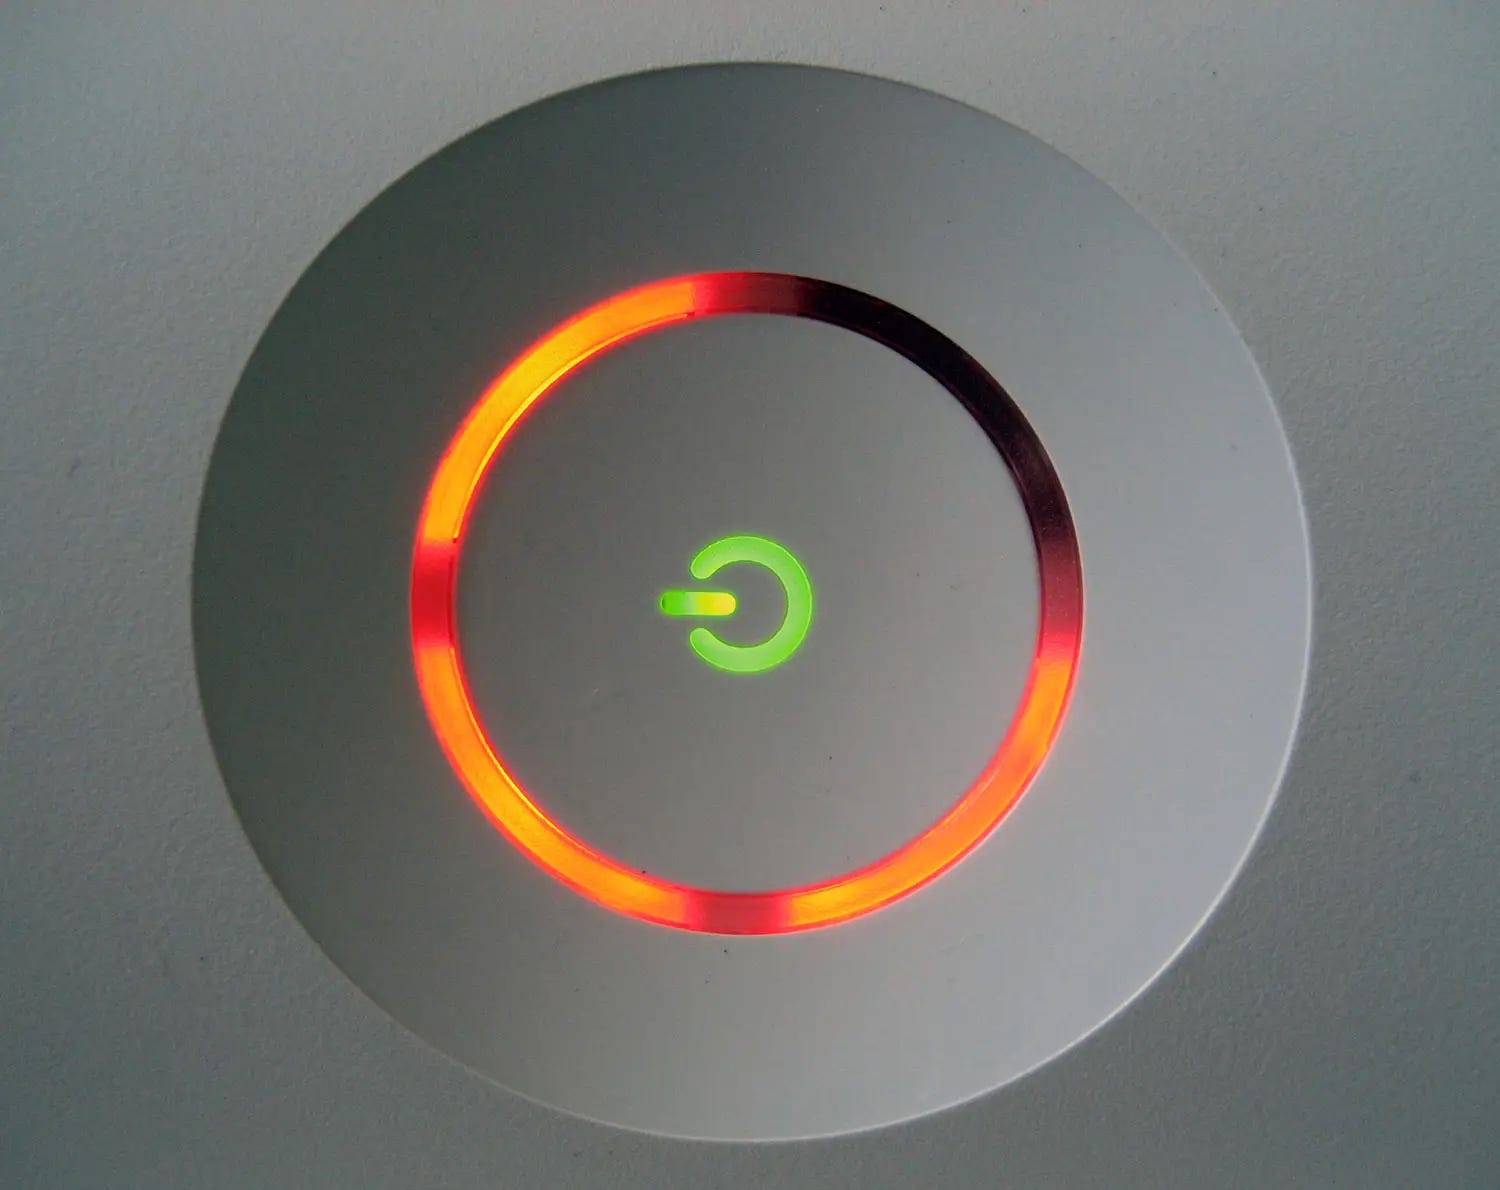 An image of the Xbox 360’s green power symbol surrounded by a bright red ring of lights that’s only 75% complete. The red rings are an indication that the system’s hardware has failed.